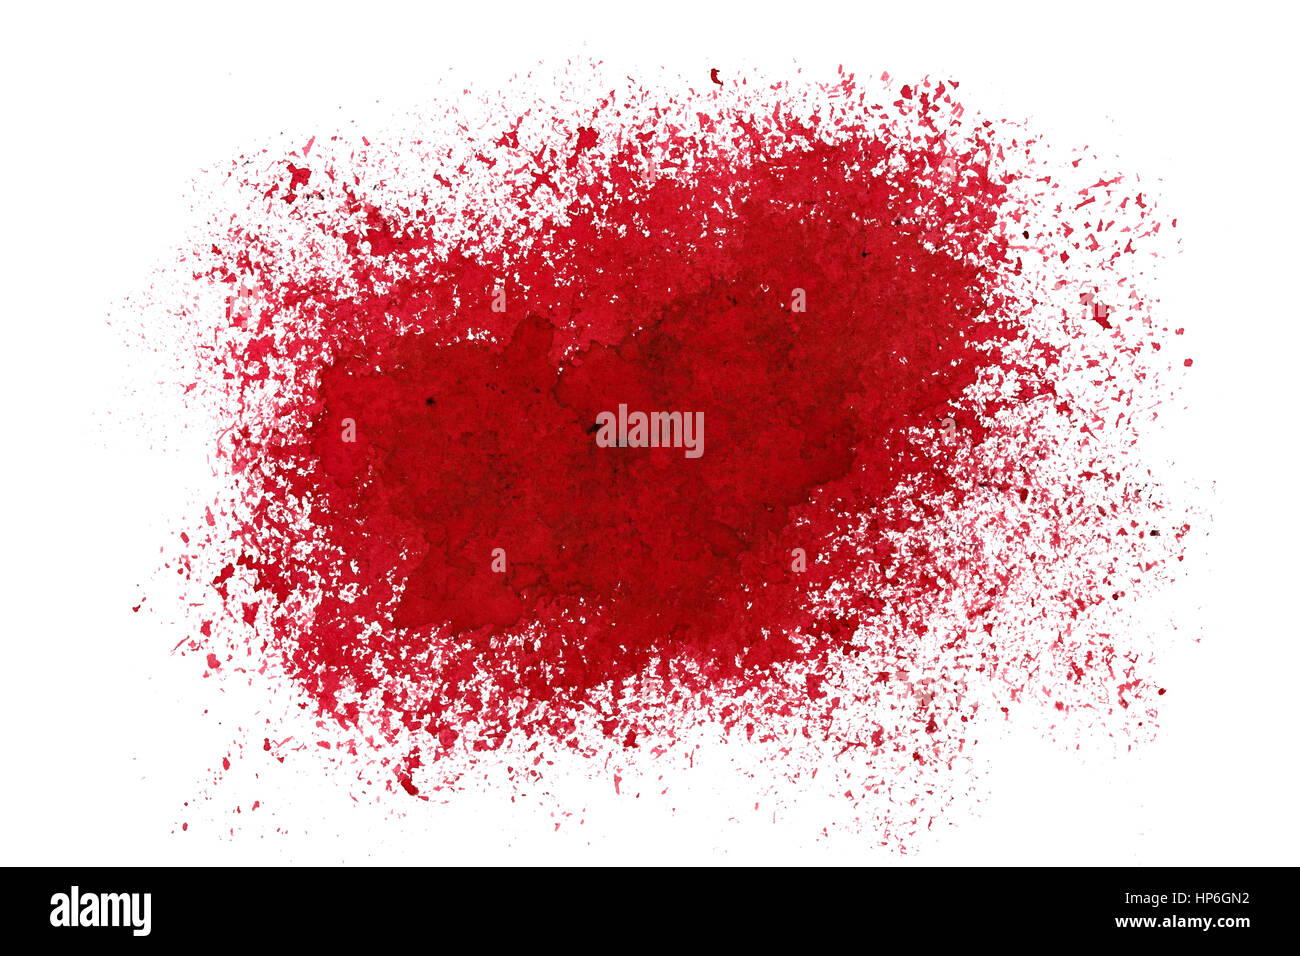 Sprayed red stain. Grunge abstract background. Space for your own text. Raster illustration Stock Photo